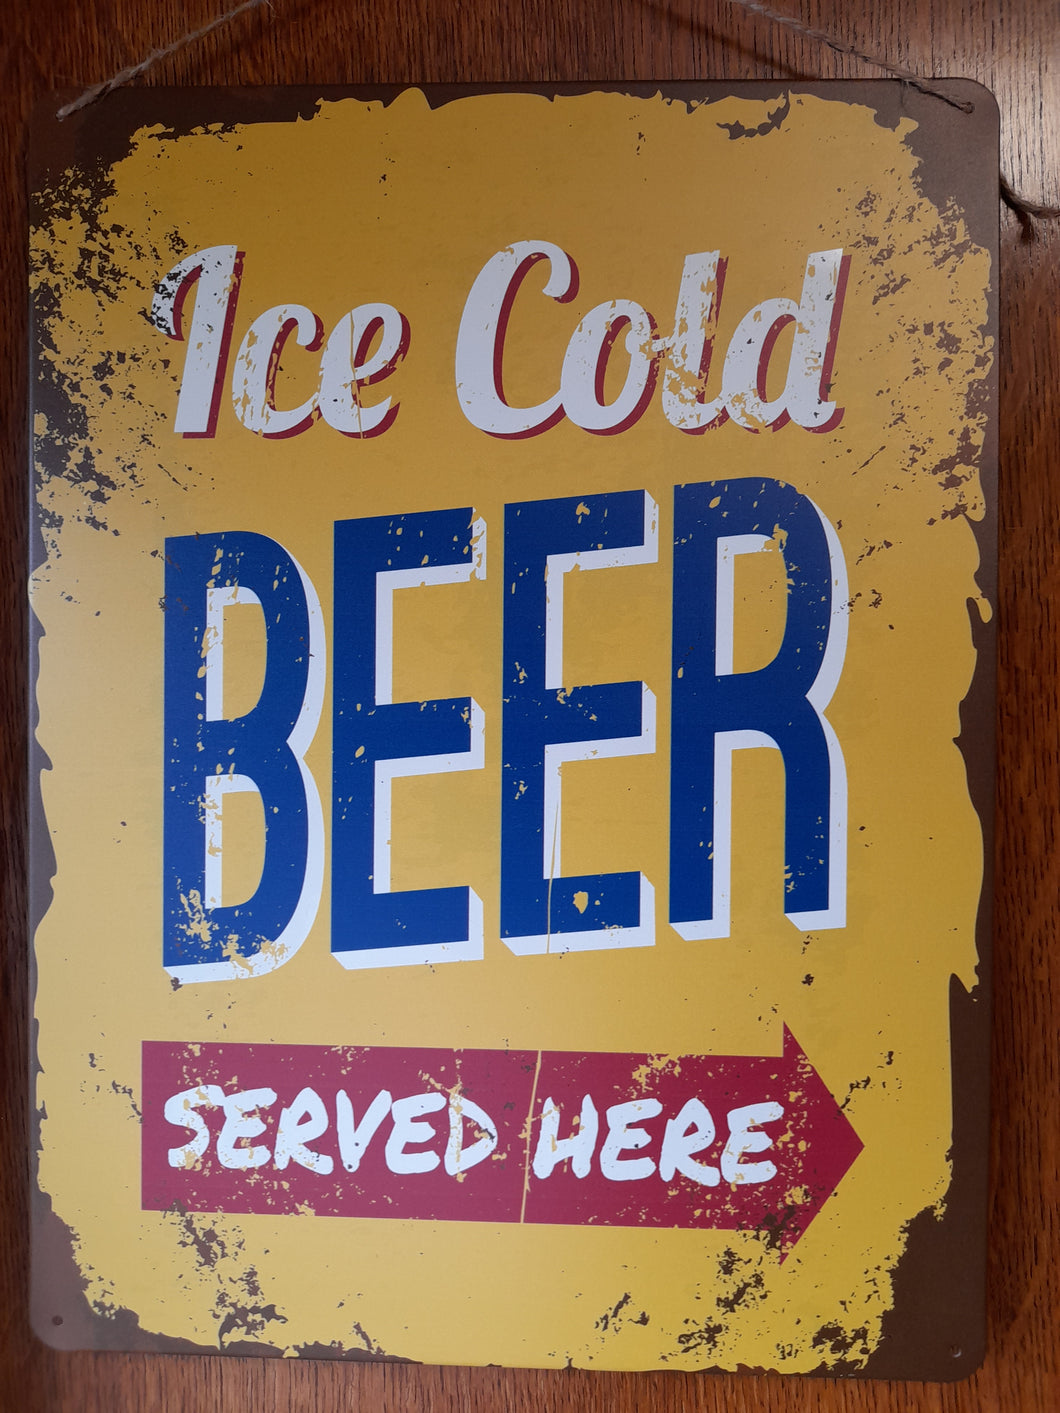 Iced cold beer served here - vintage style metal sign